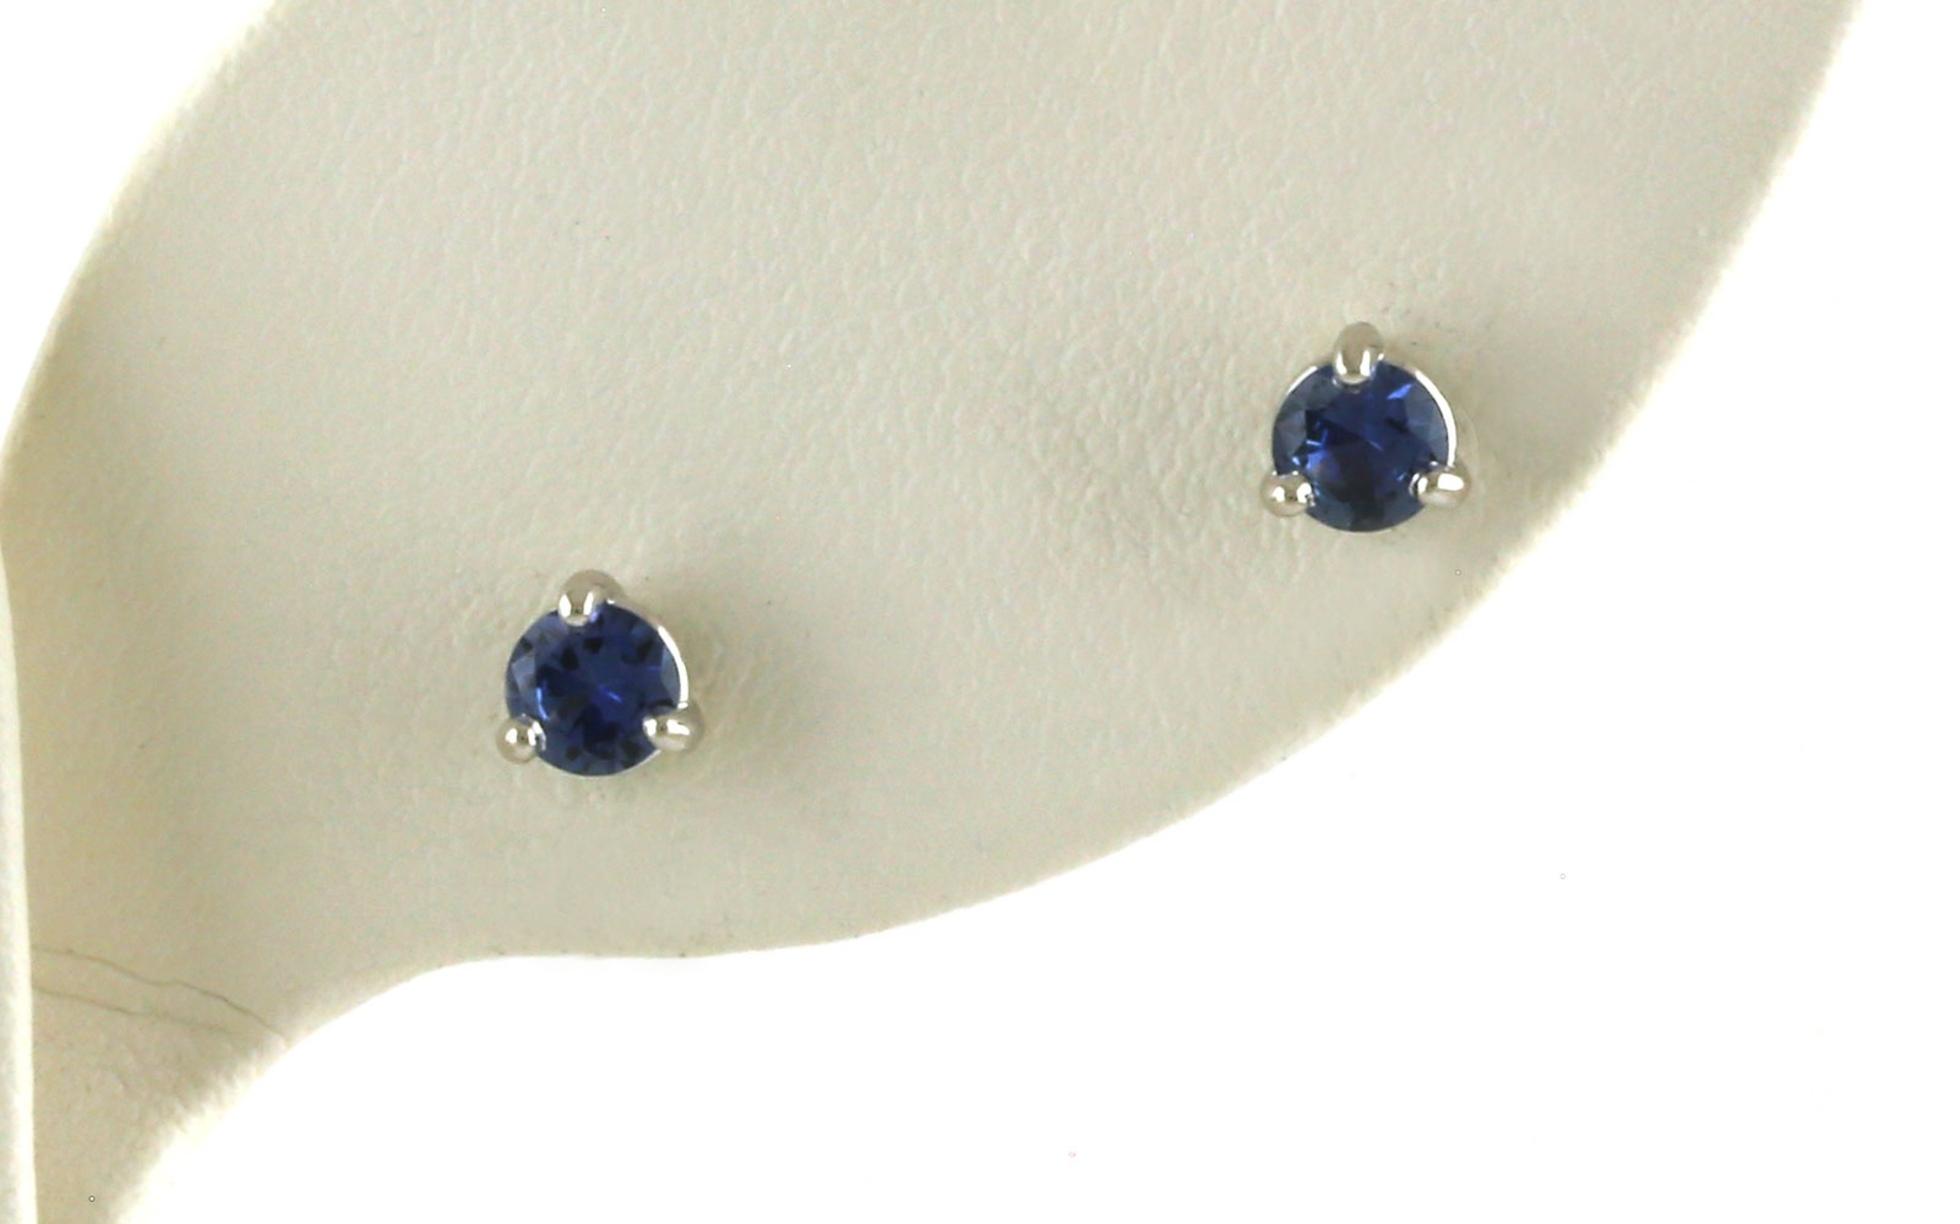 Montana Yogo Sapphire Studs in 3-Prong Martini Settings in White Gold (0.44cts TWT)